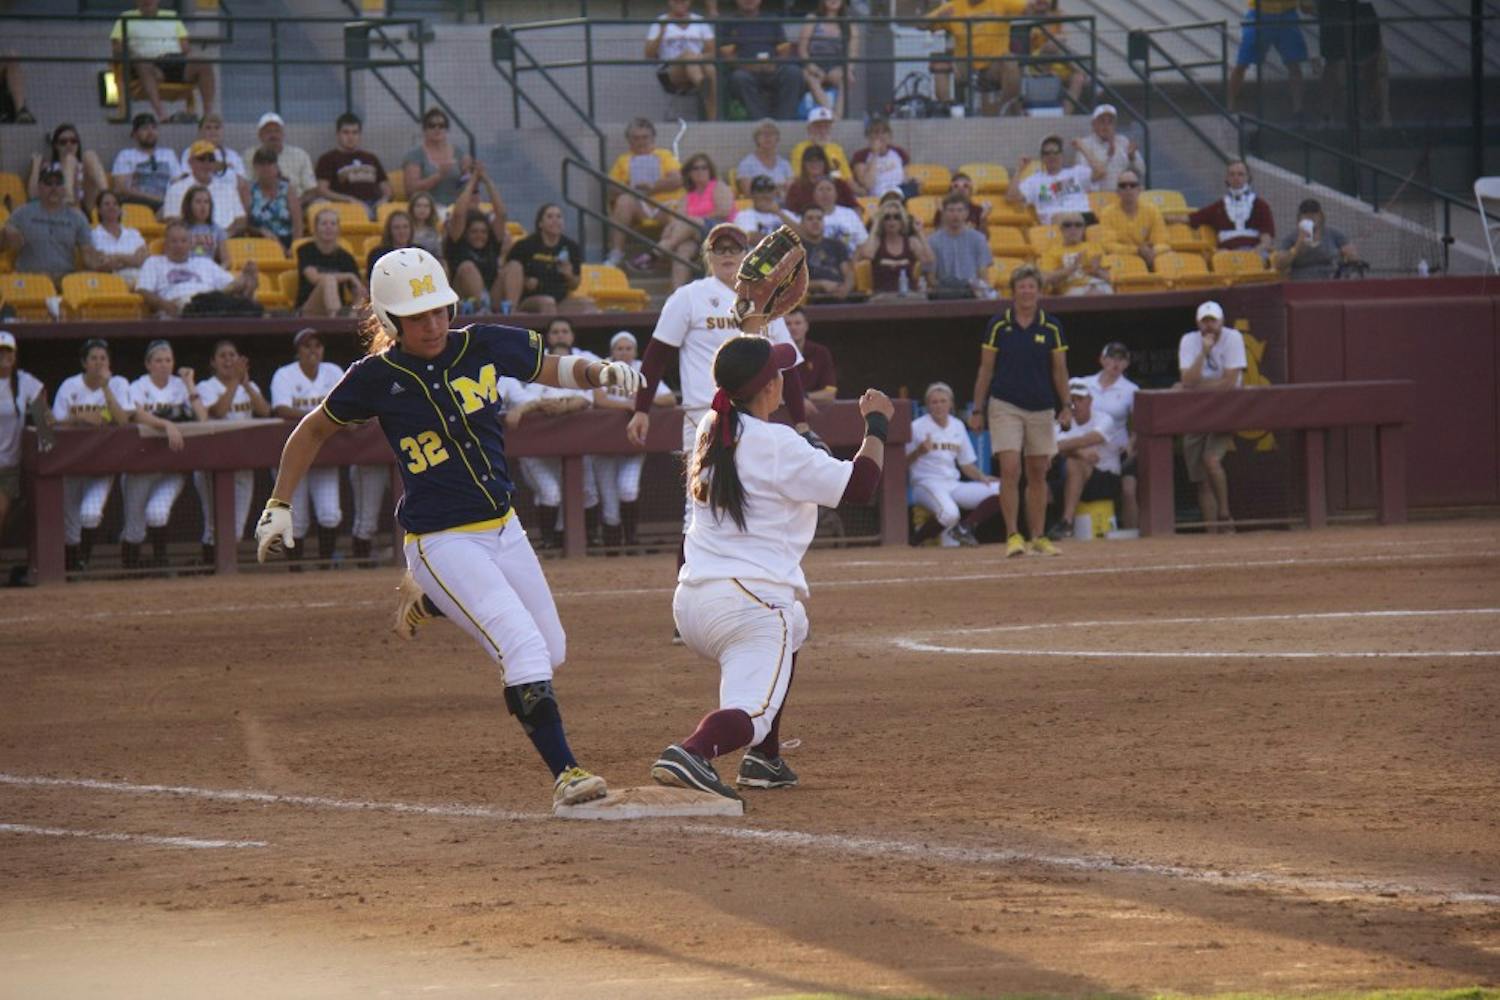 Junior first baseman Bethany Kemp tags a Michigan Wolverine, the second out of the play for the Devils during game two of the NCAA Tempe Regional Championships against the Michigan Wolverines on Sunday, May 18, at Farrington Stadium. ASU lost to Michigan 4-5. (Photo by Becca Smouse)